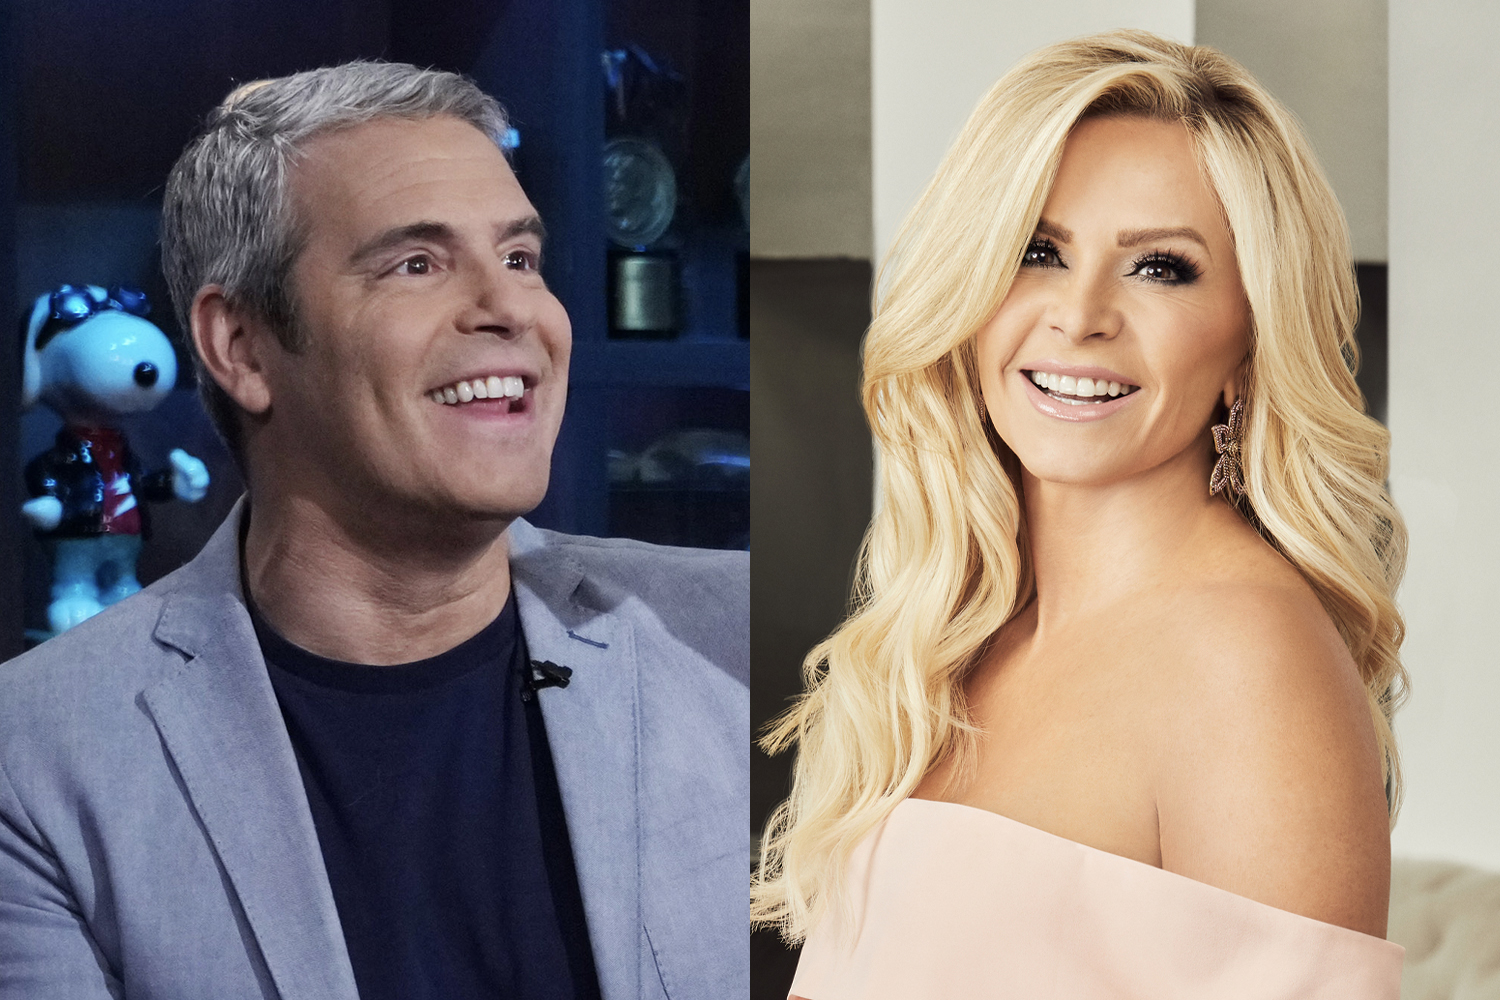 Andy Cohen smiling and wearing a gray jacket with a blue shirt. Tamra Judge smiles in a promotional photo for 'Real Housewives of Orange County.'